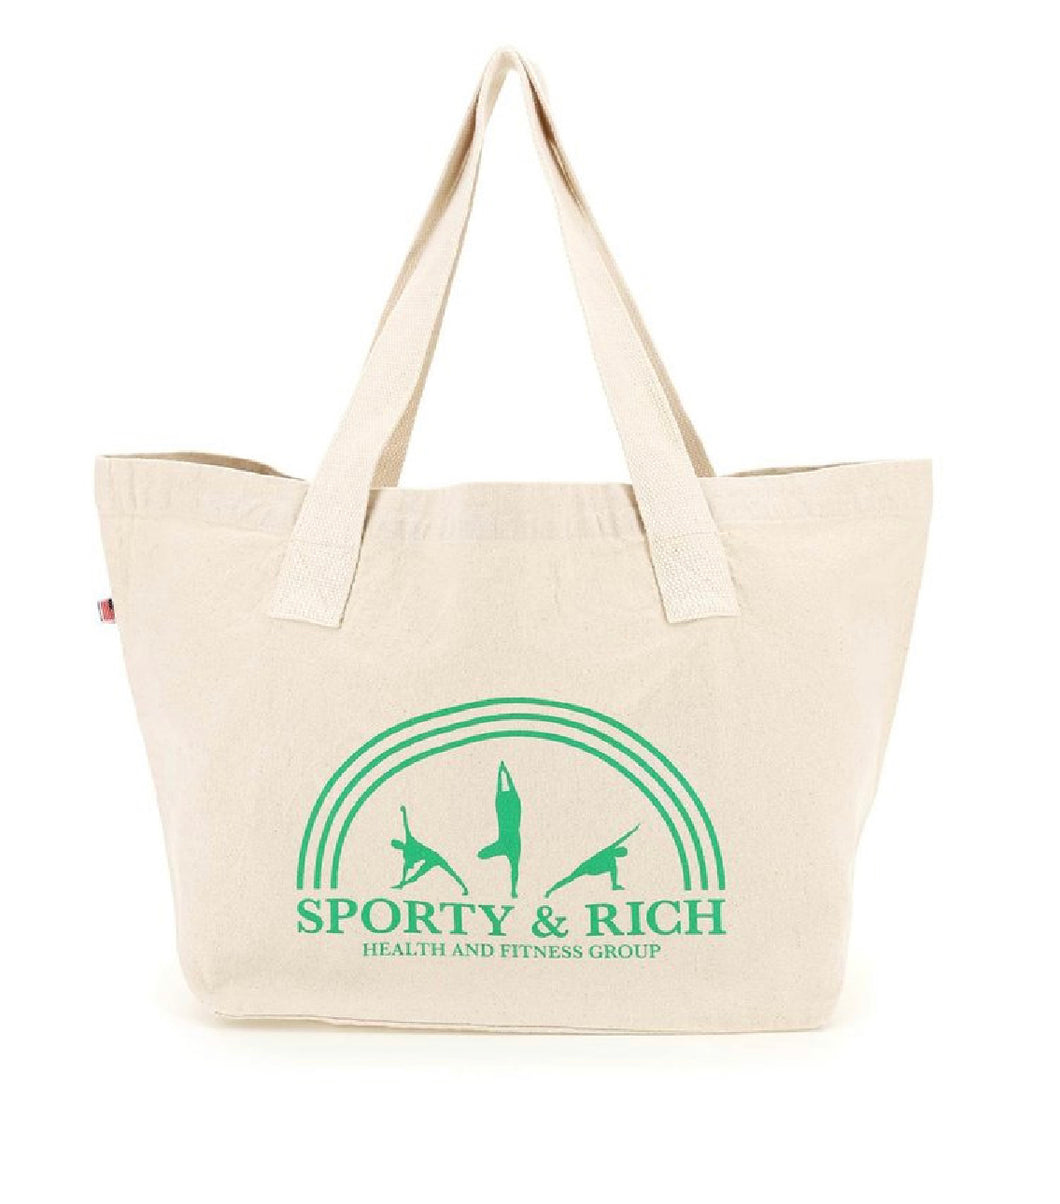 Fitness Group Tote Bag